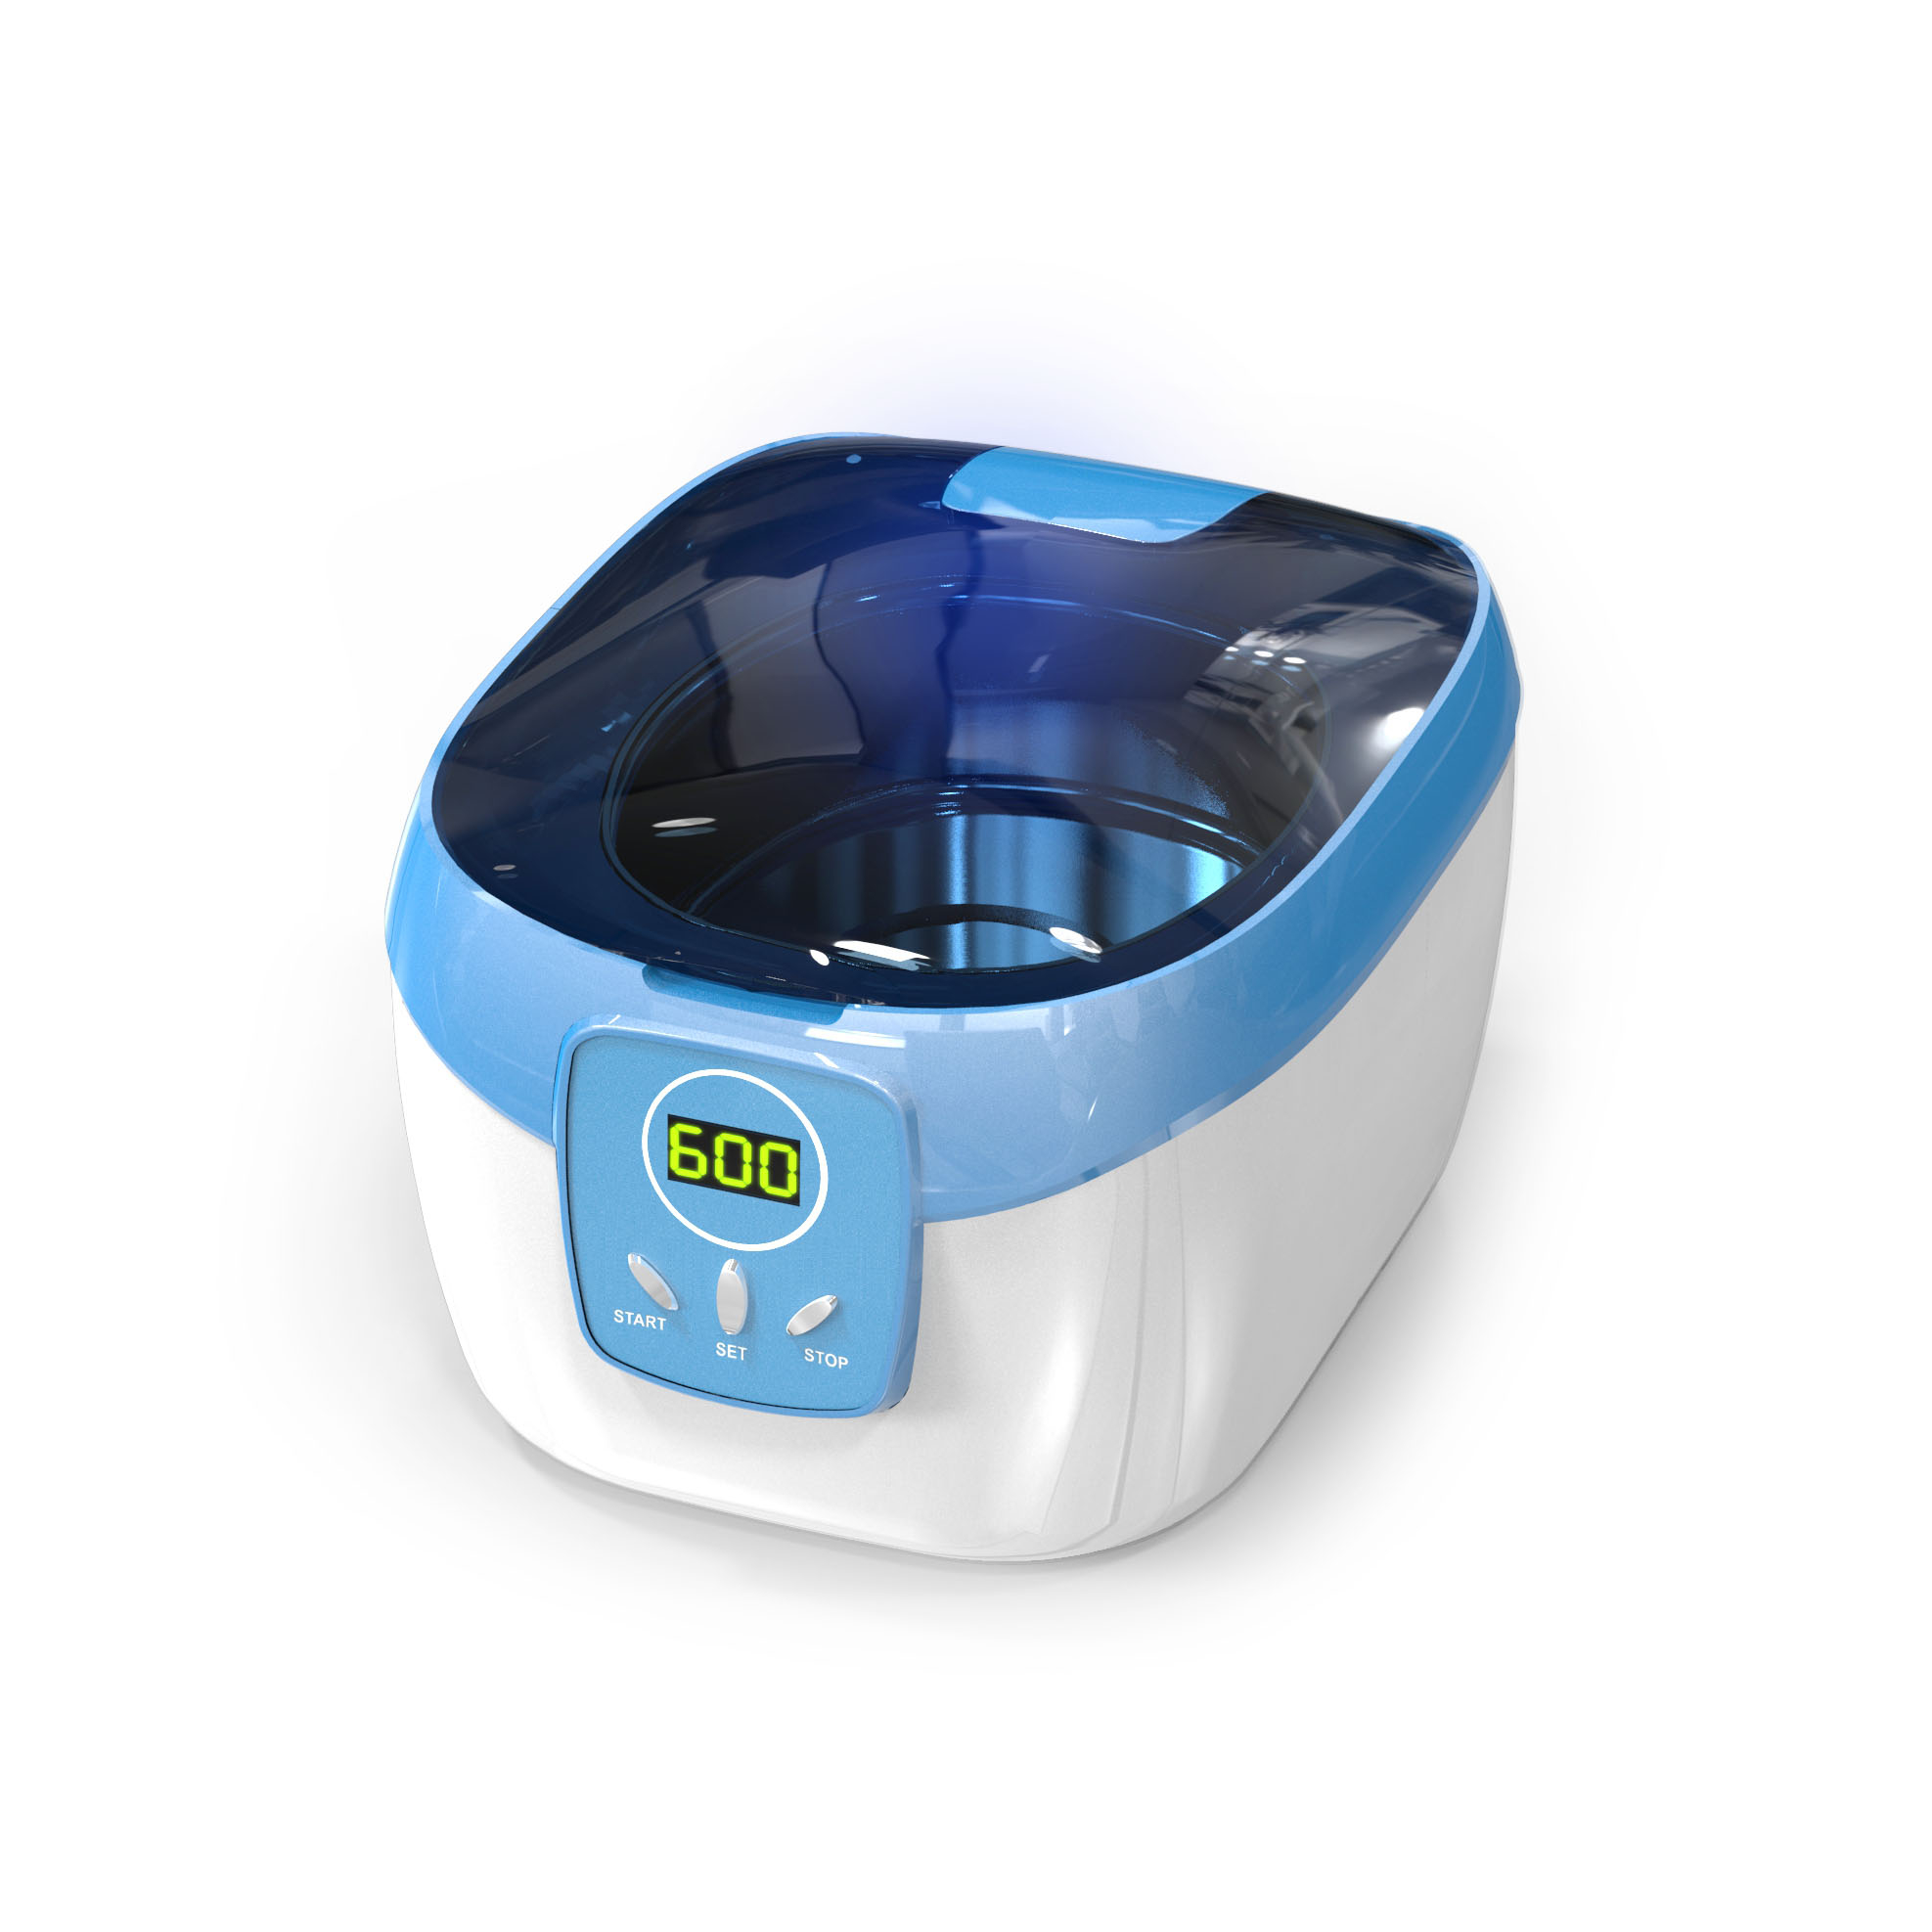 High quality good ultrasonic coin cleaner unit